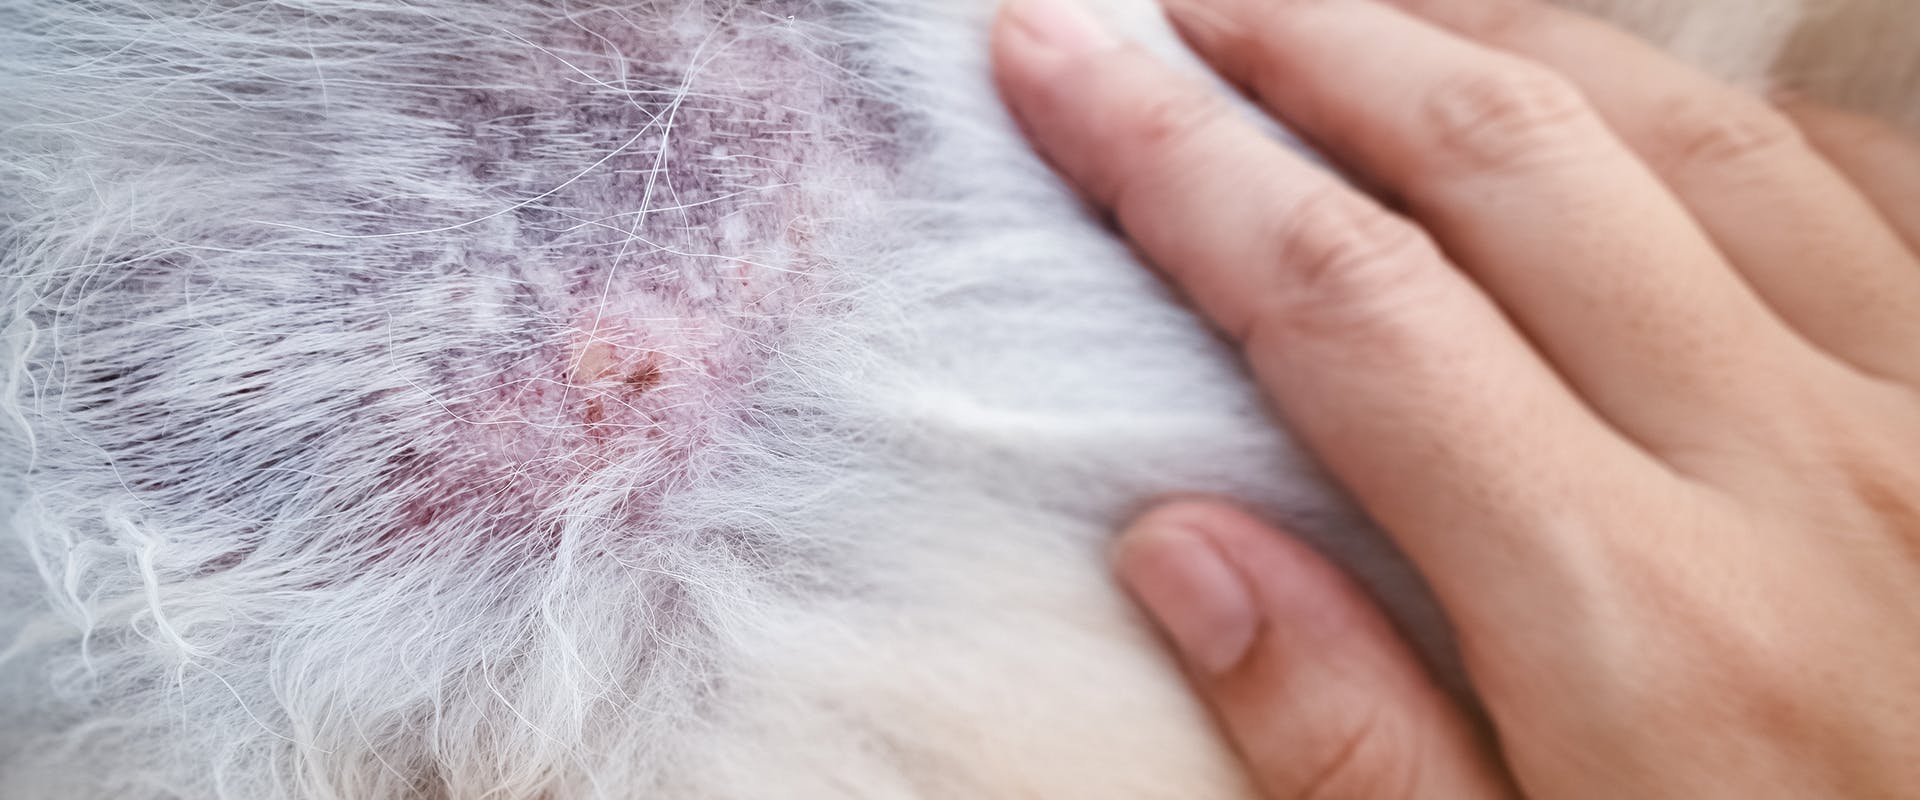 A hand parting a dog's fur, the skin red and inflamed